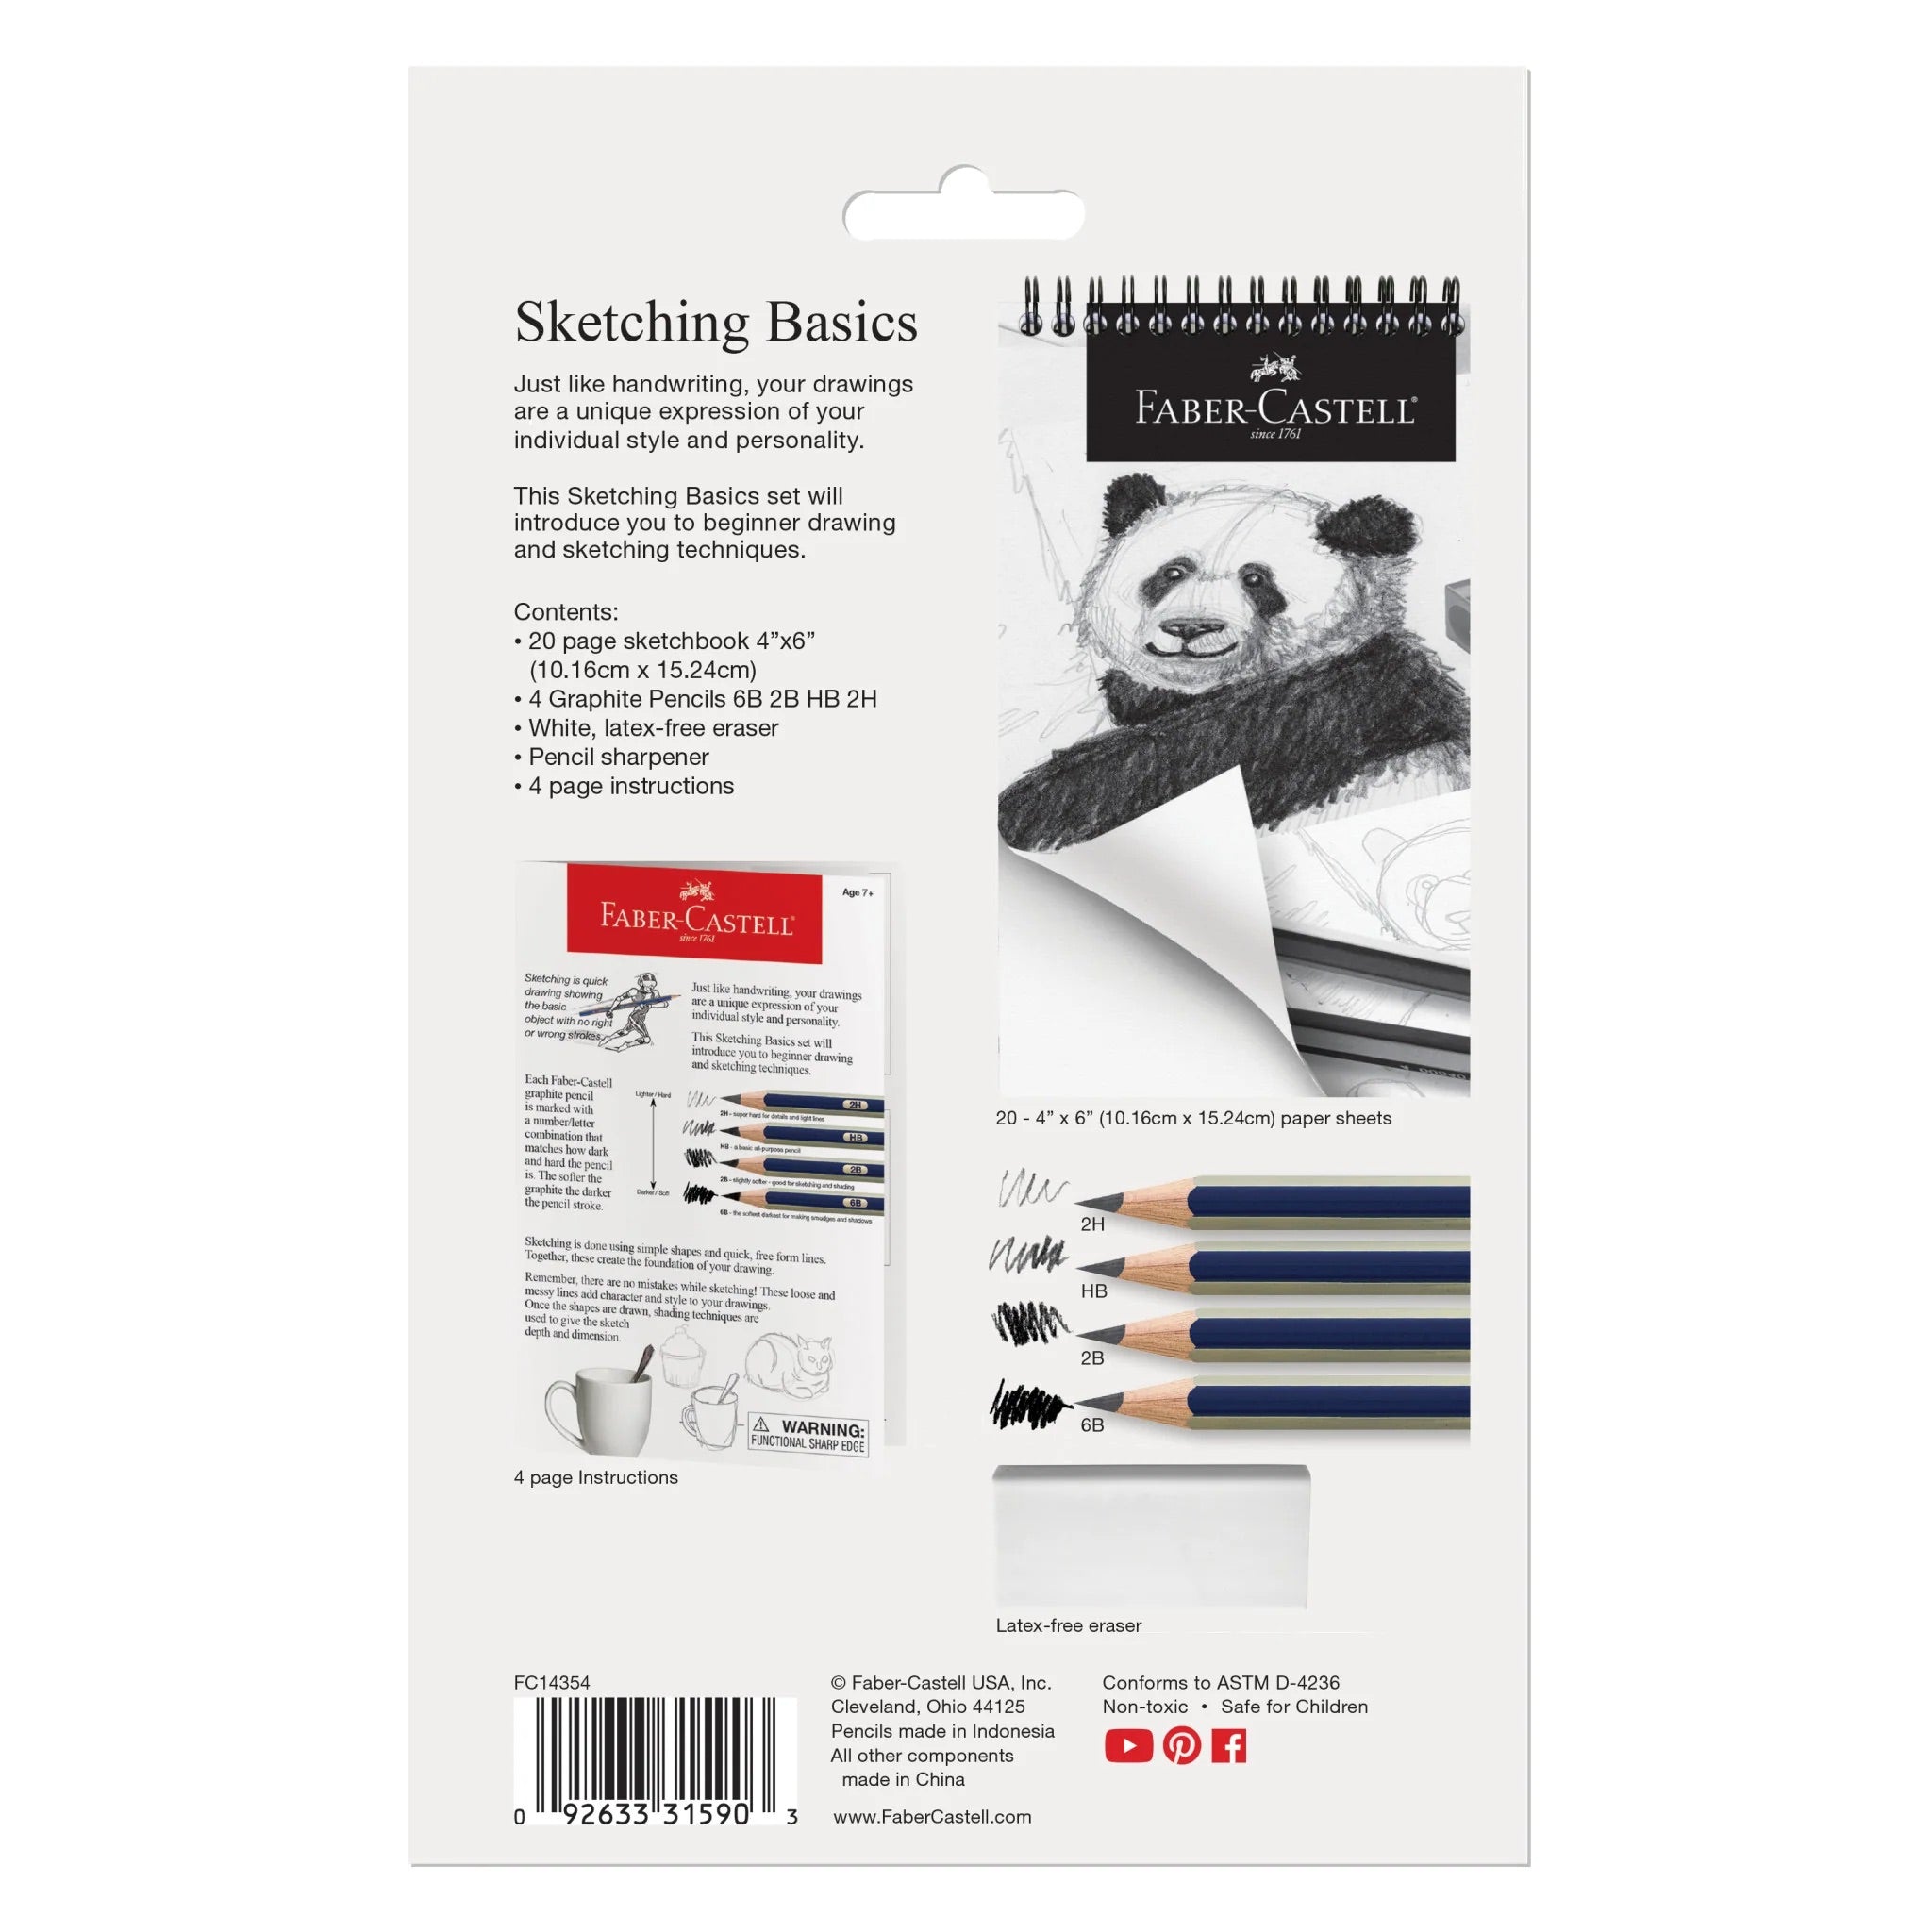 Sketching Basics by Faber-Castell #14354